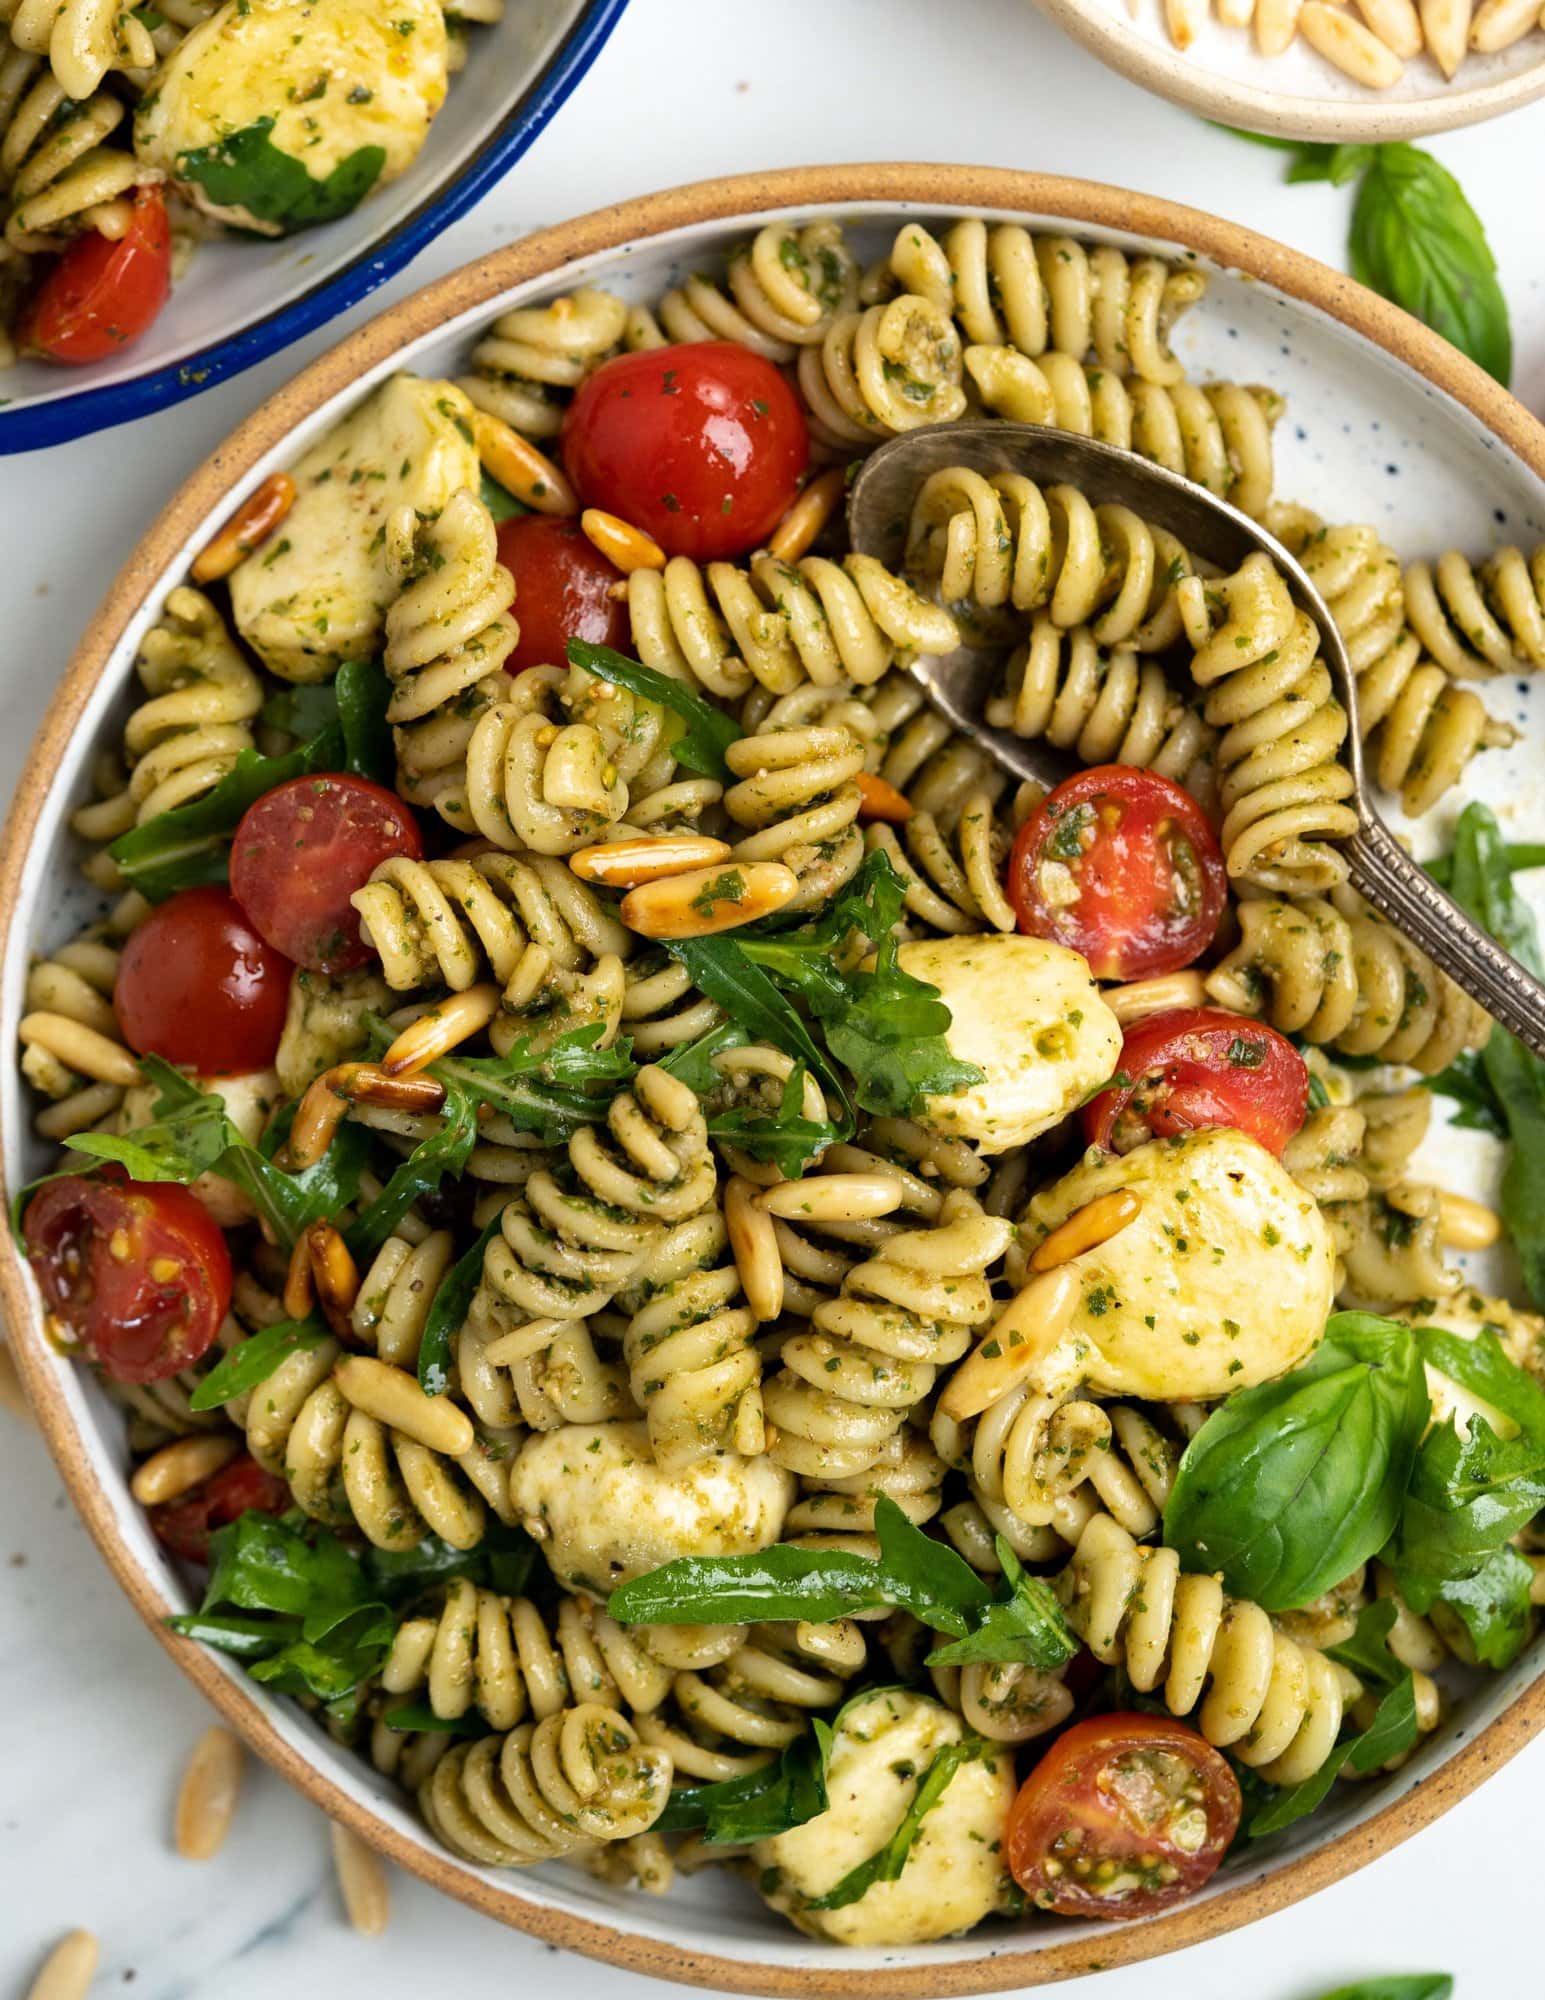 Fresh and vibrant colors of pesto pasta salad served in a plate.